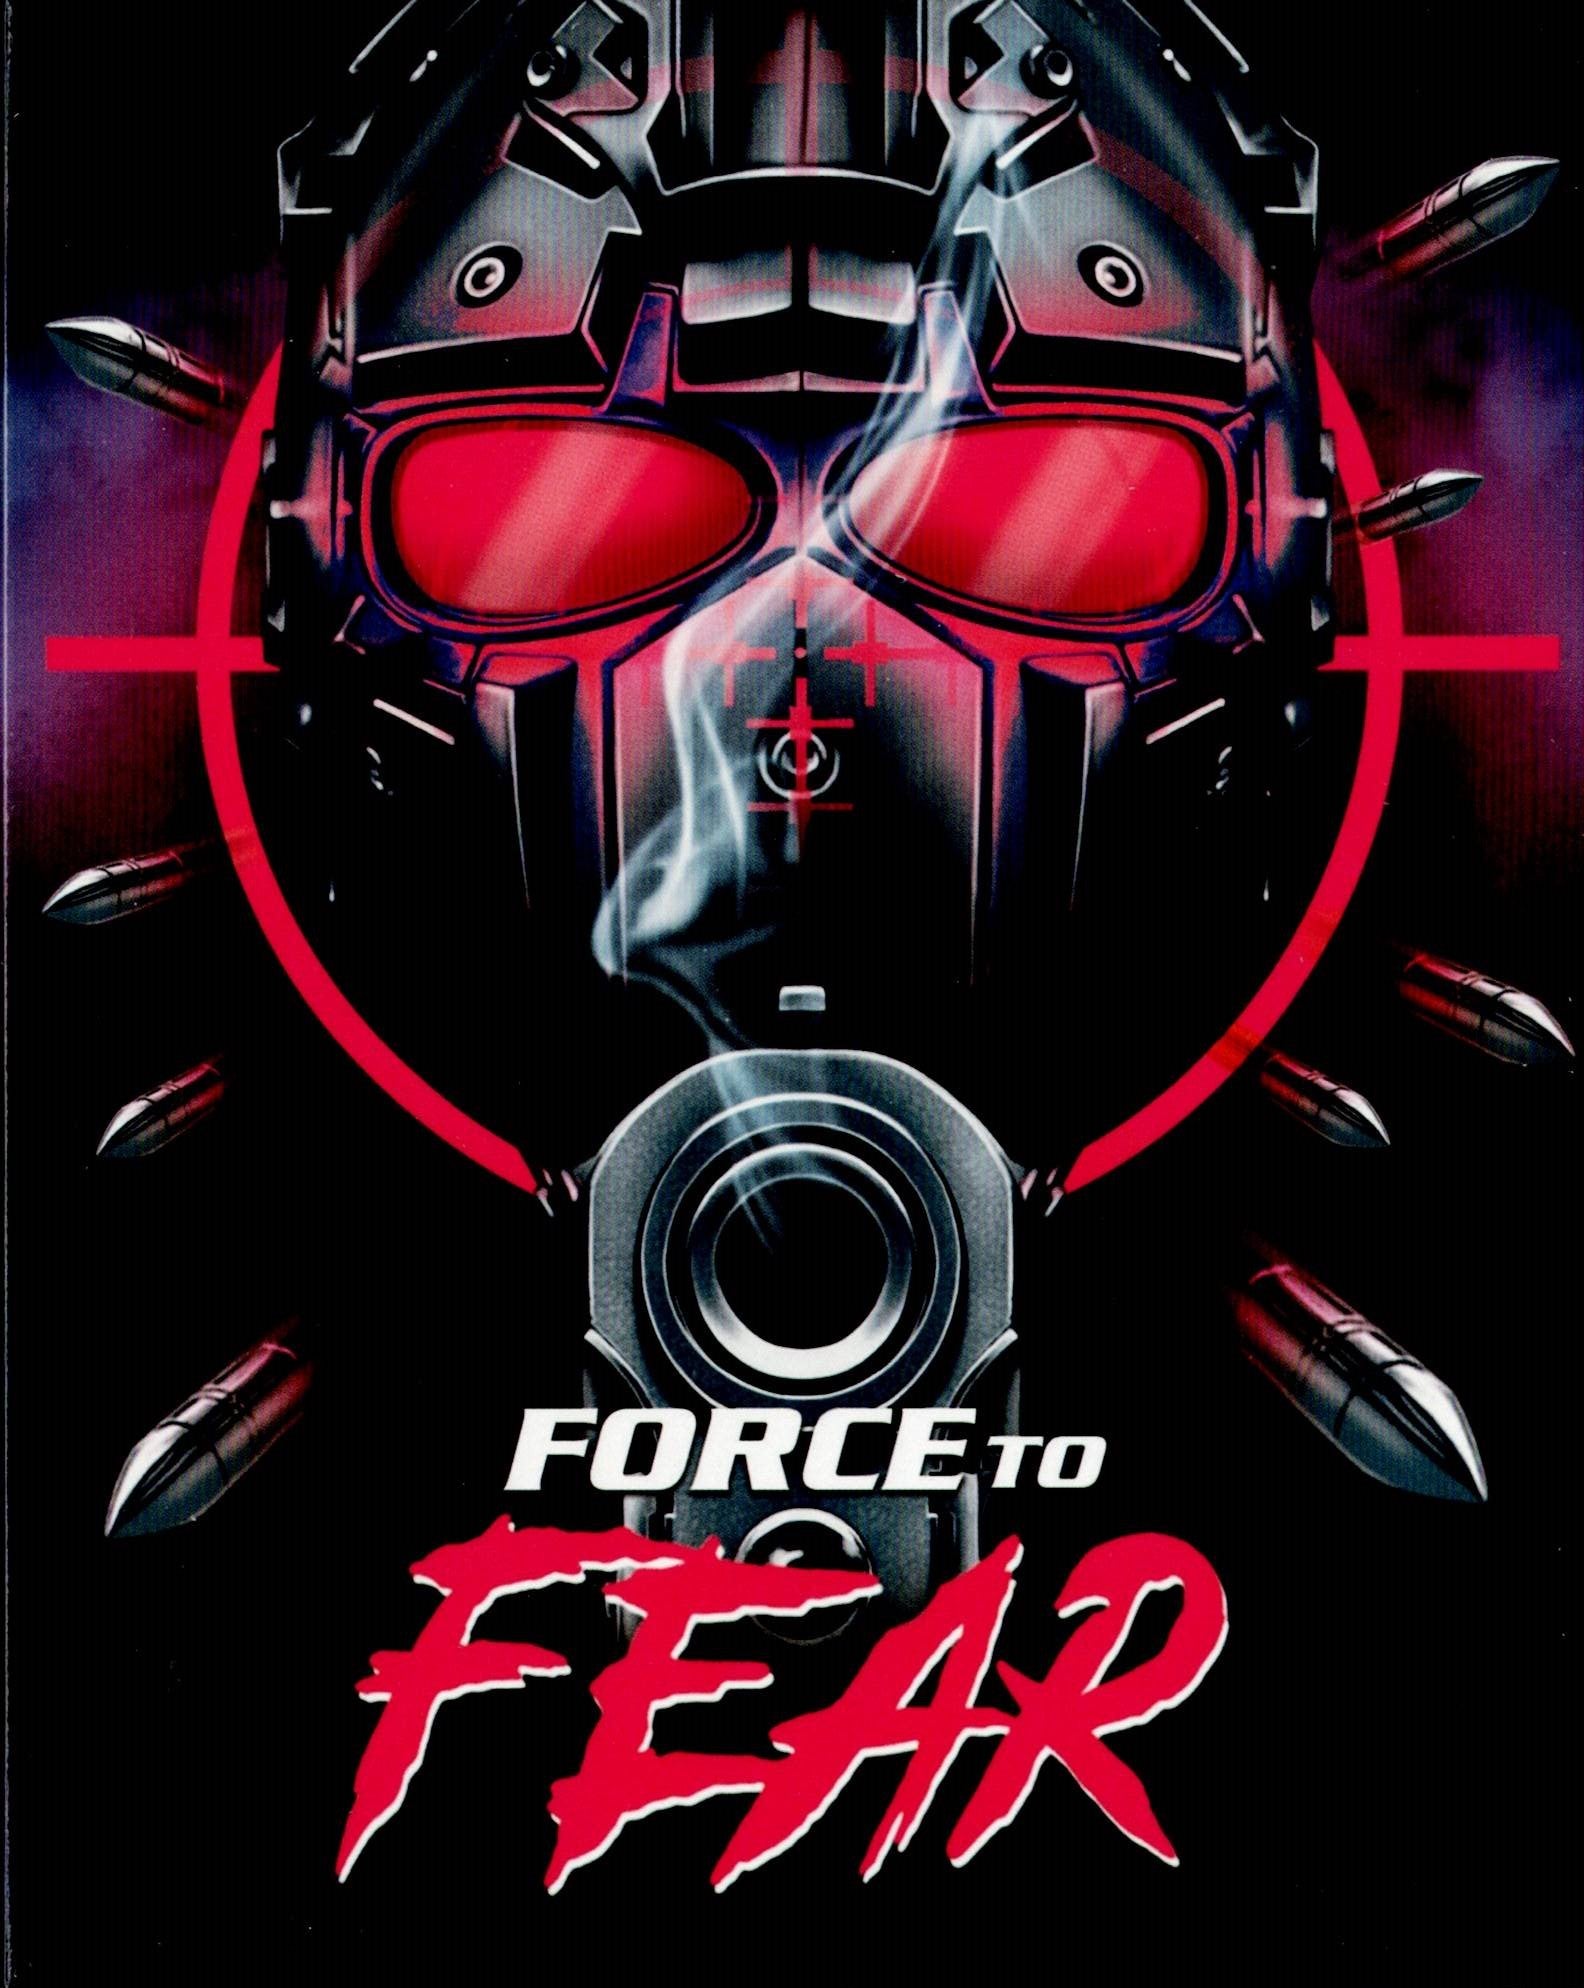 FORCE TO FEAR (LIMITED EDITION) BLU-RAY